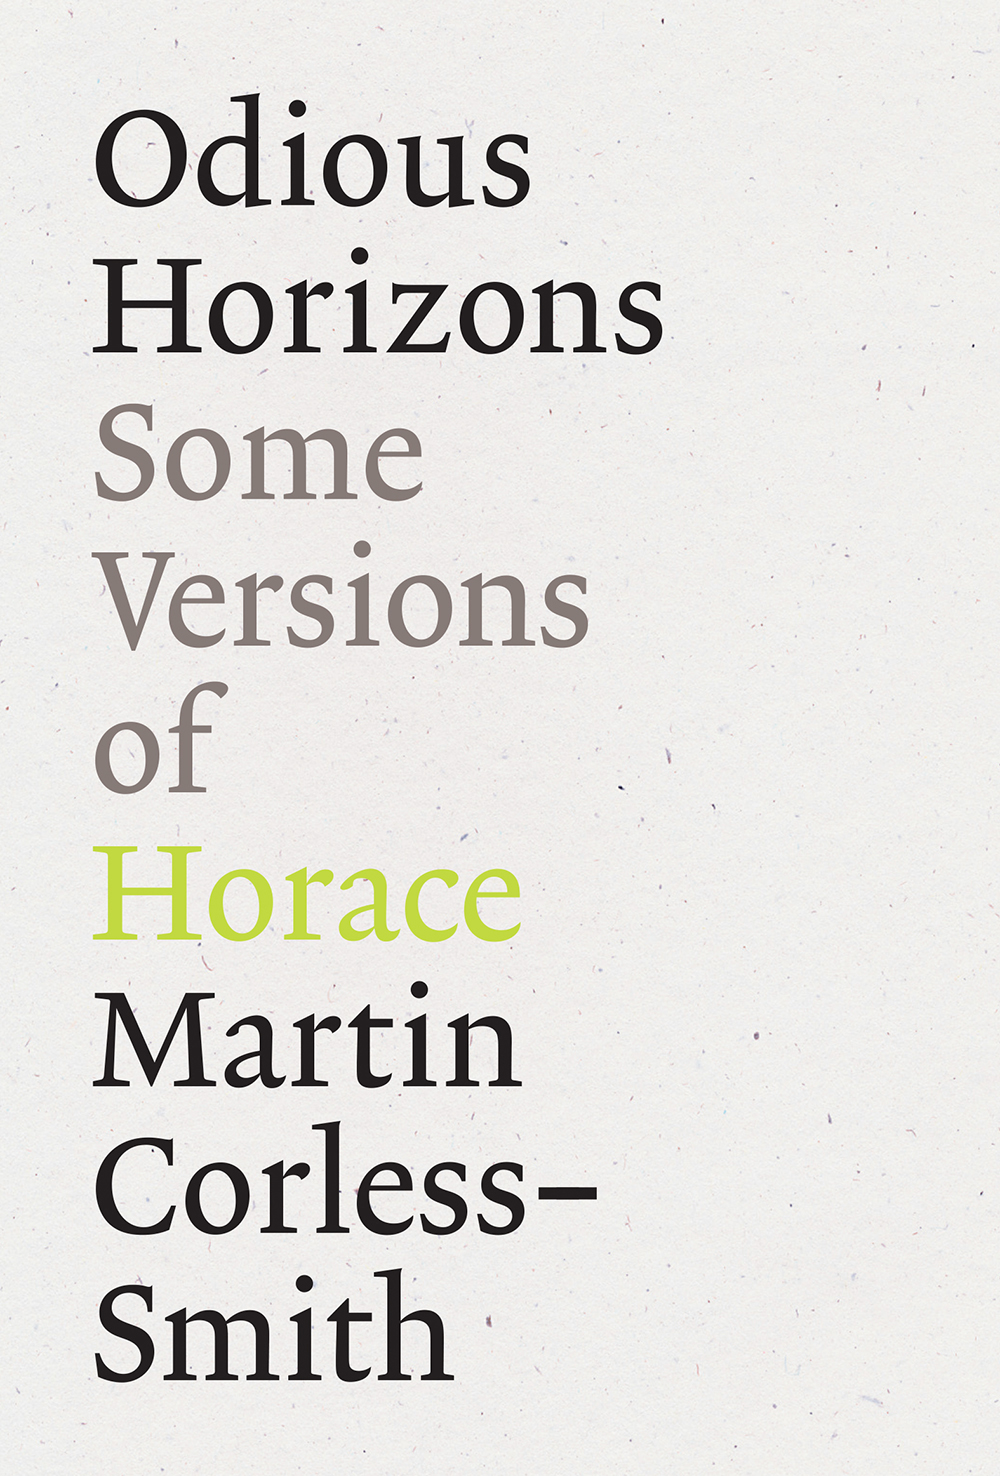 Odious Horizons: Some Versions of Horace by Martin Corless-Smith